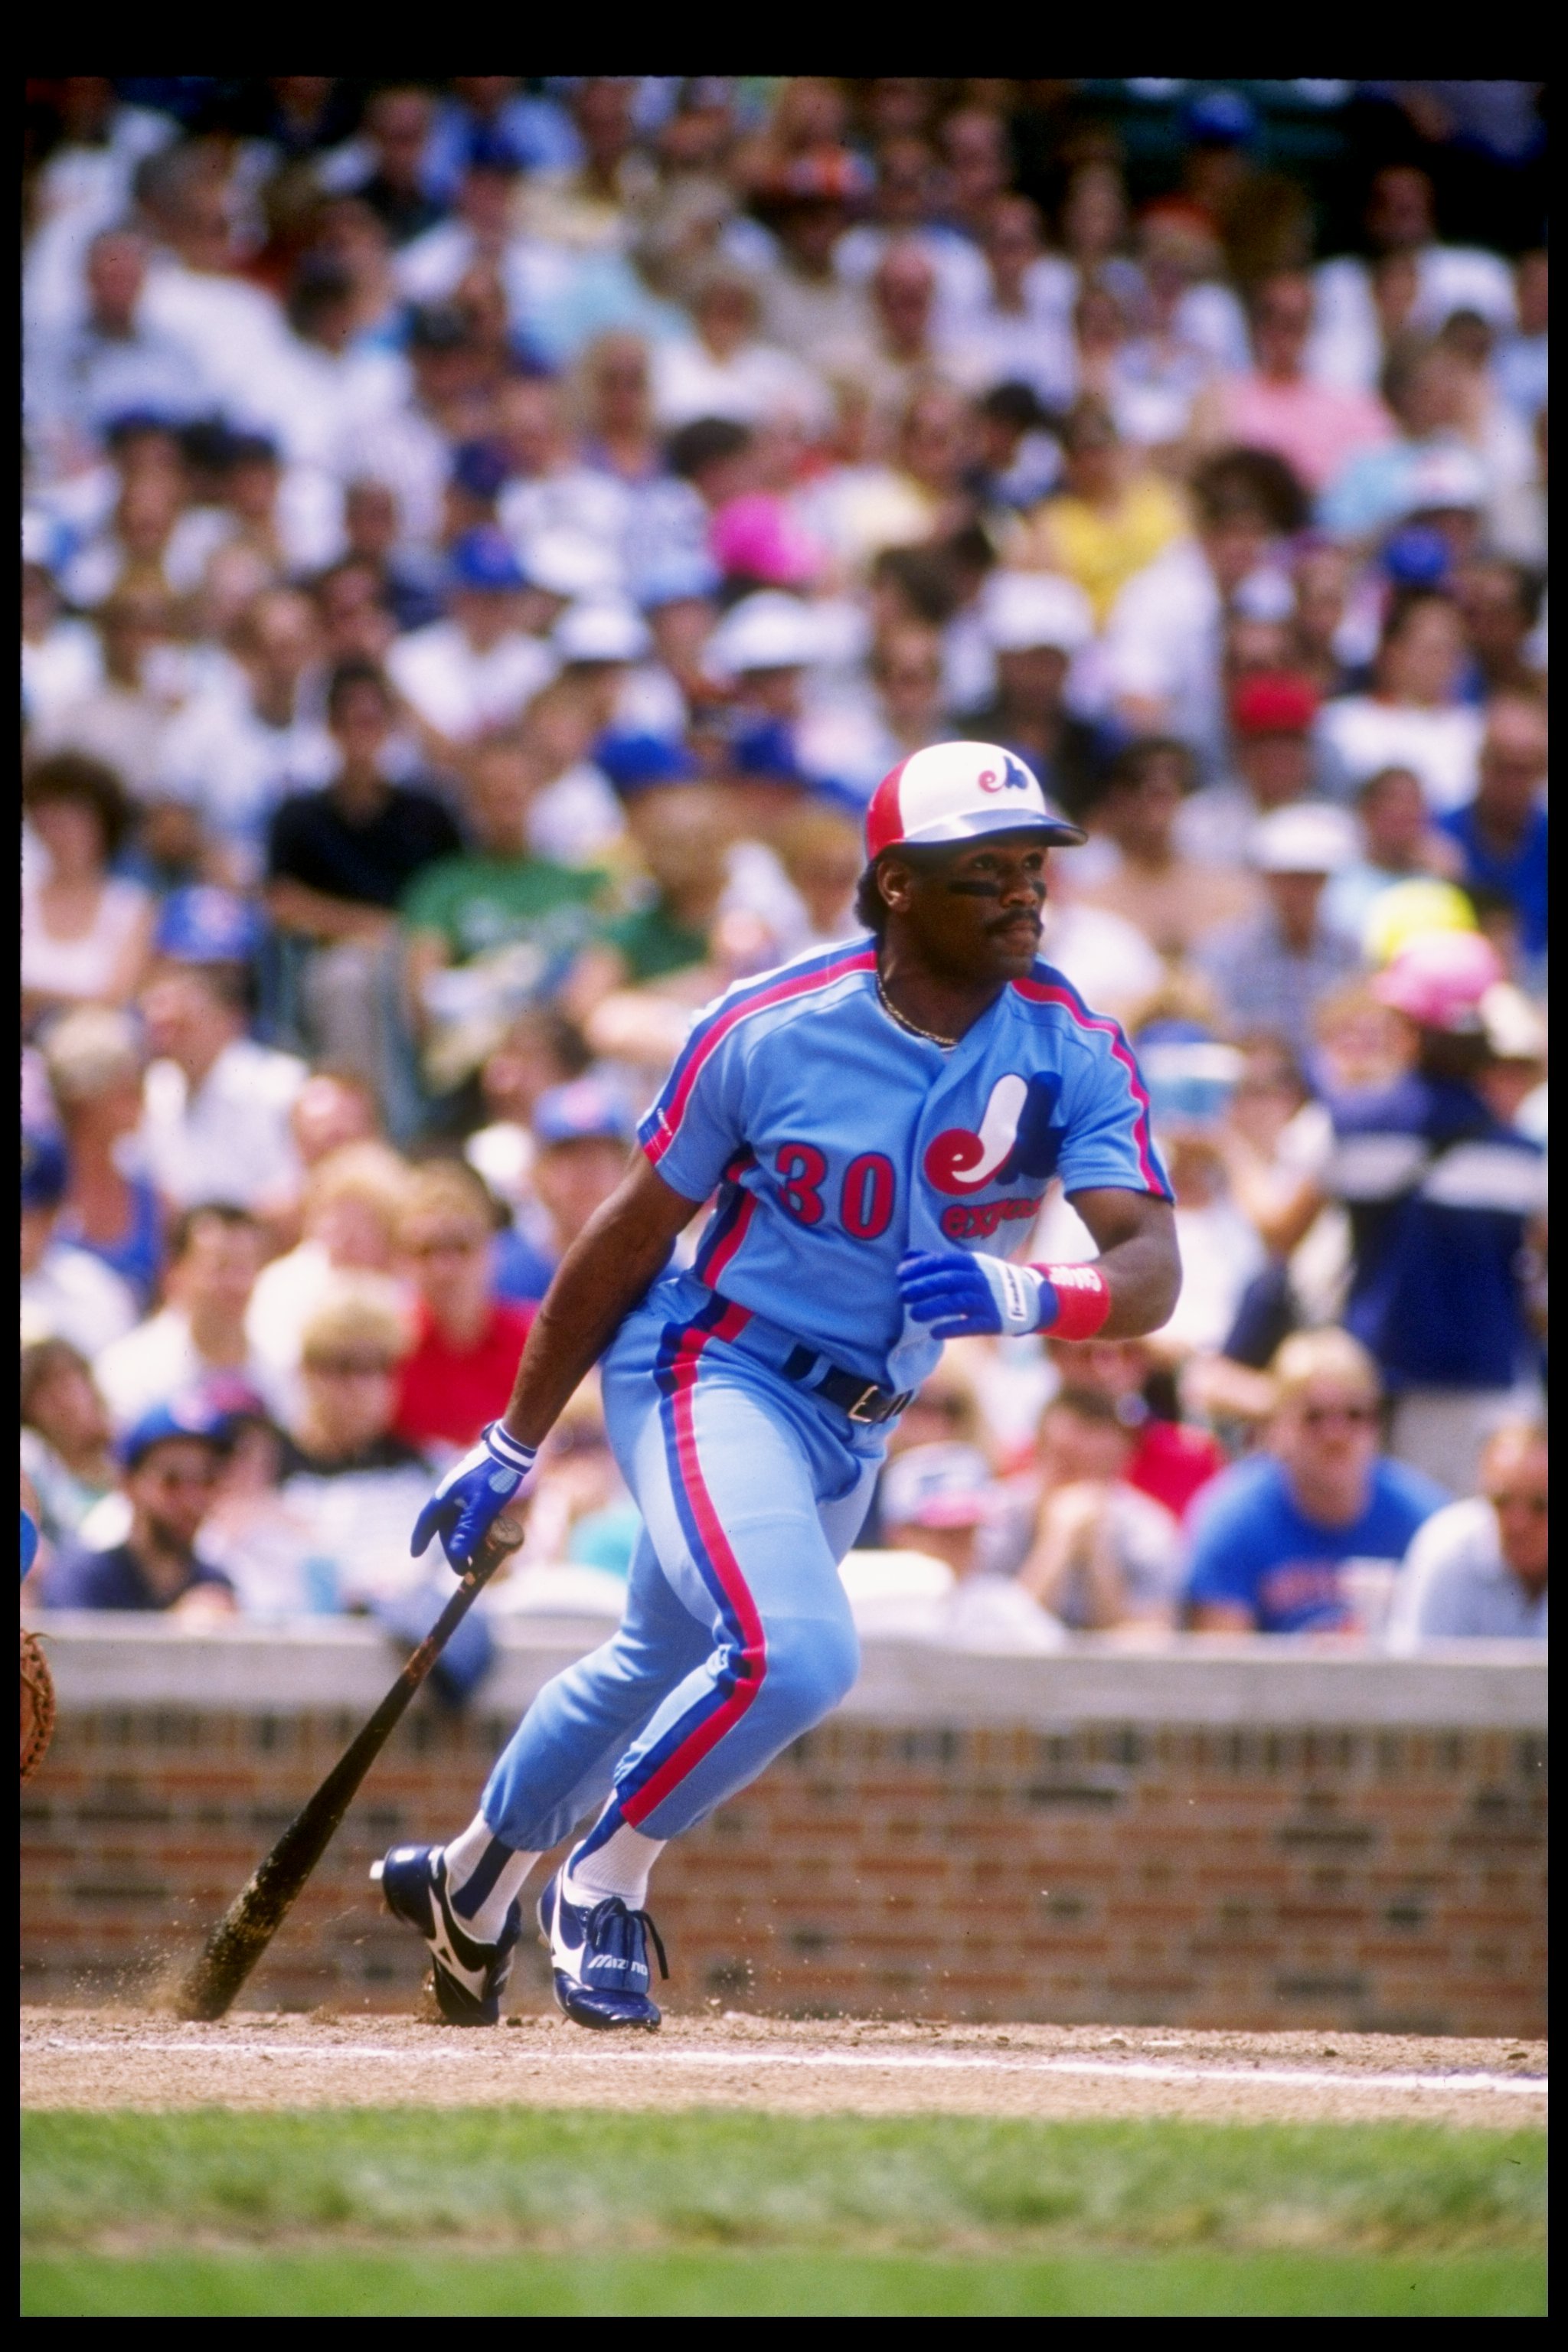 Tim Raines in the late 80's.